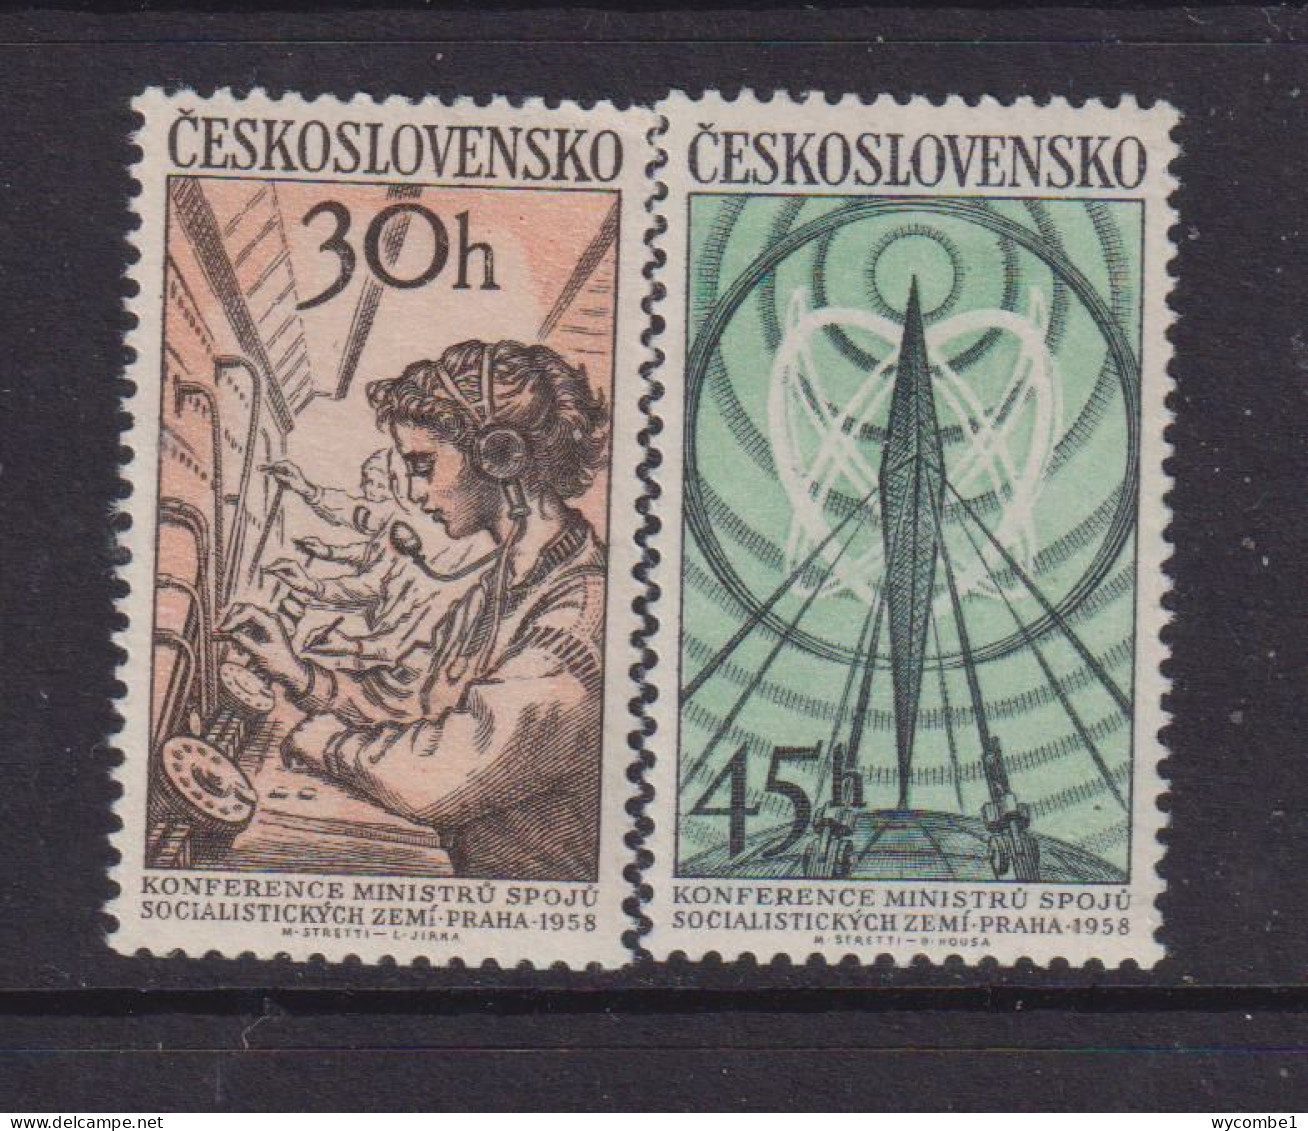 CZECHOSLOVAKIA  - 1958 Postal Conference Set  Never Hinged Mint - Unused Stamps